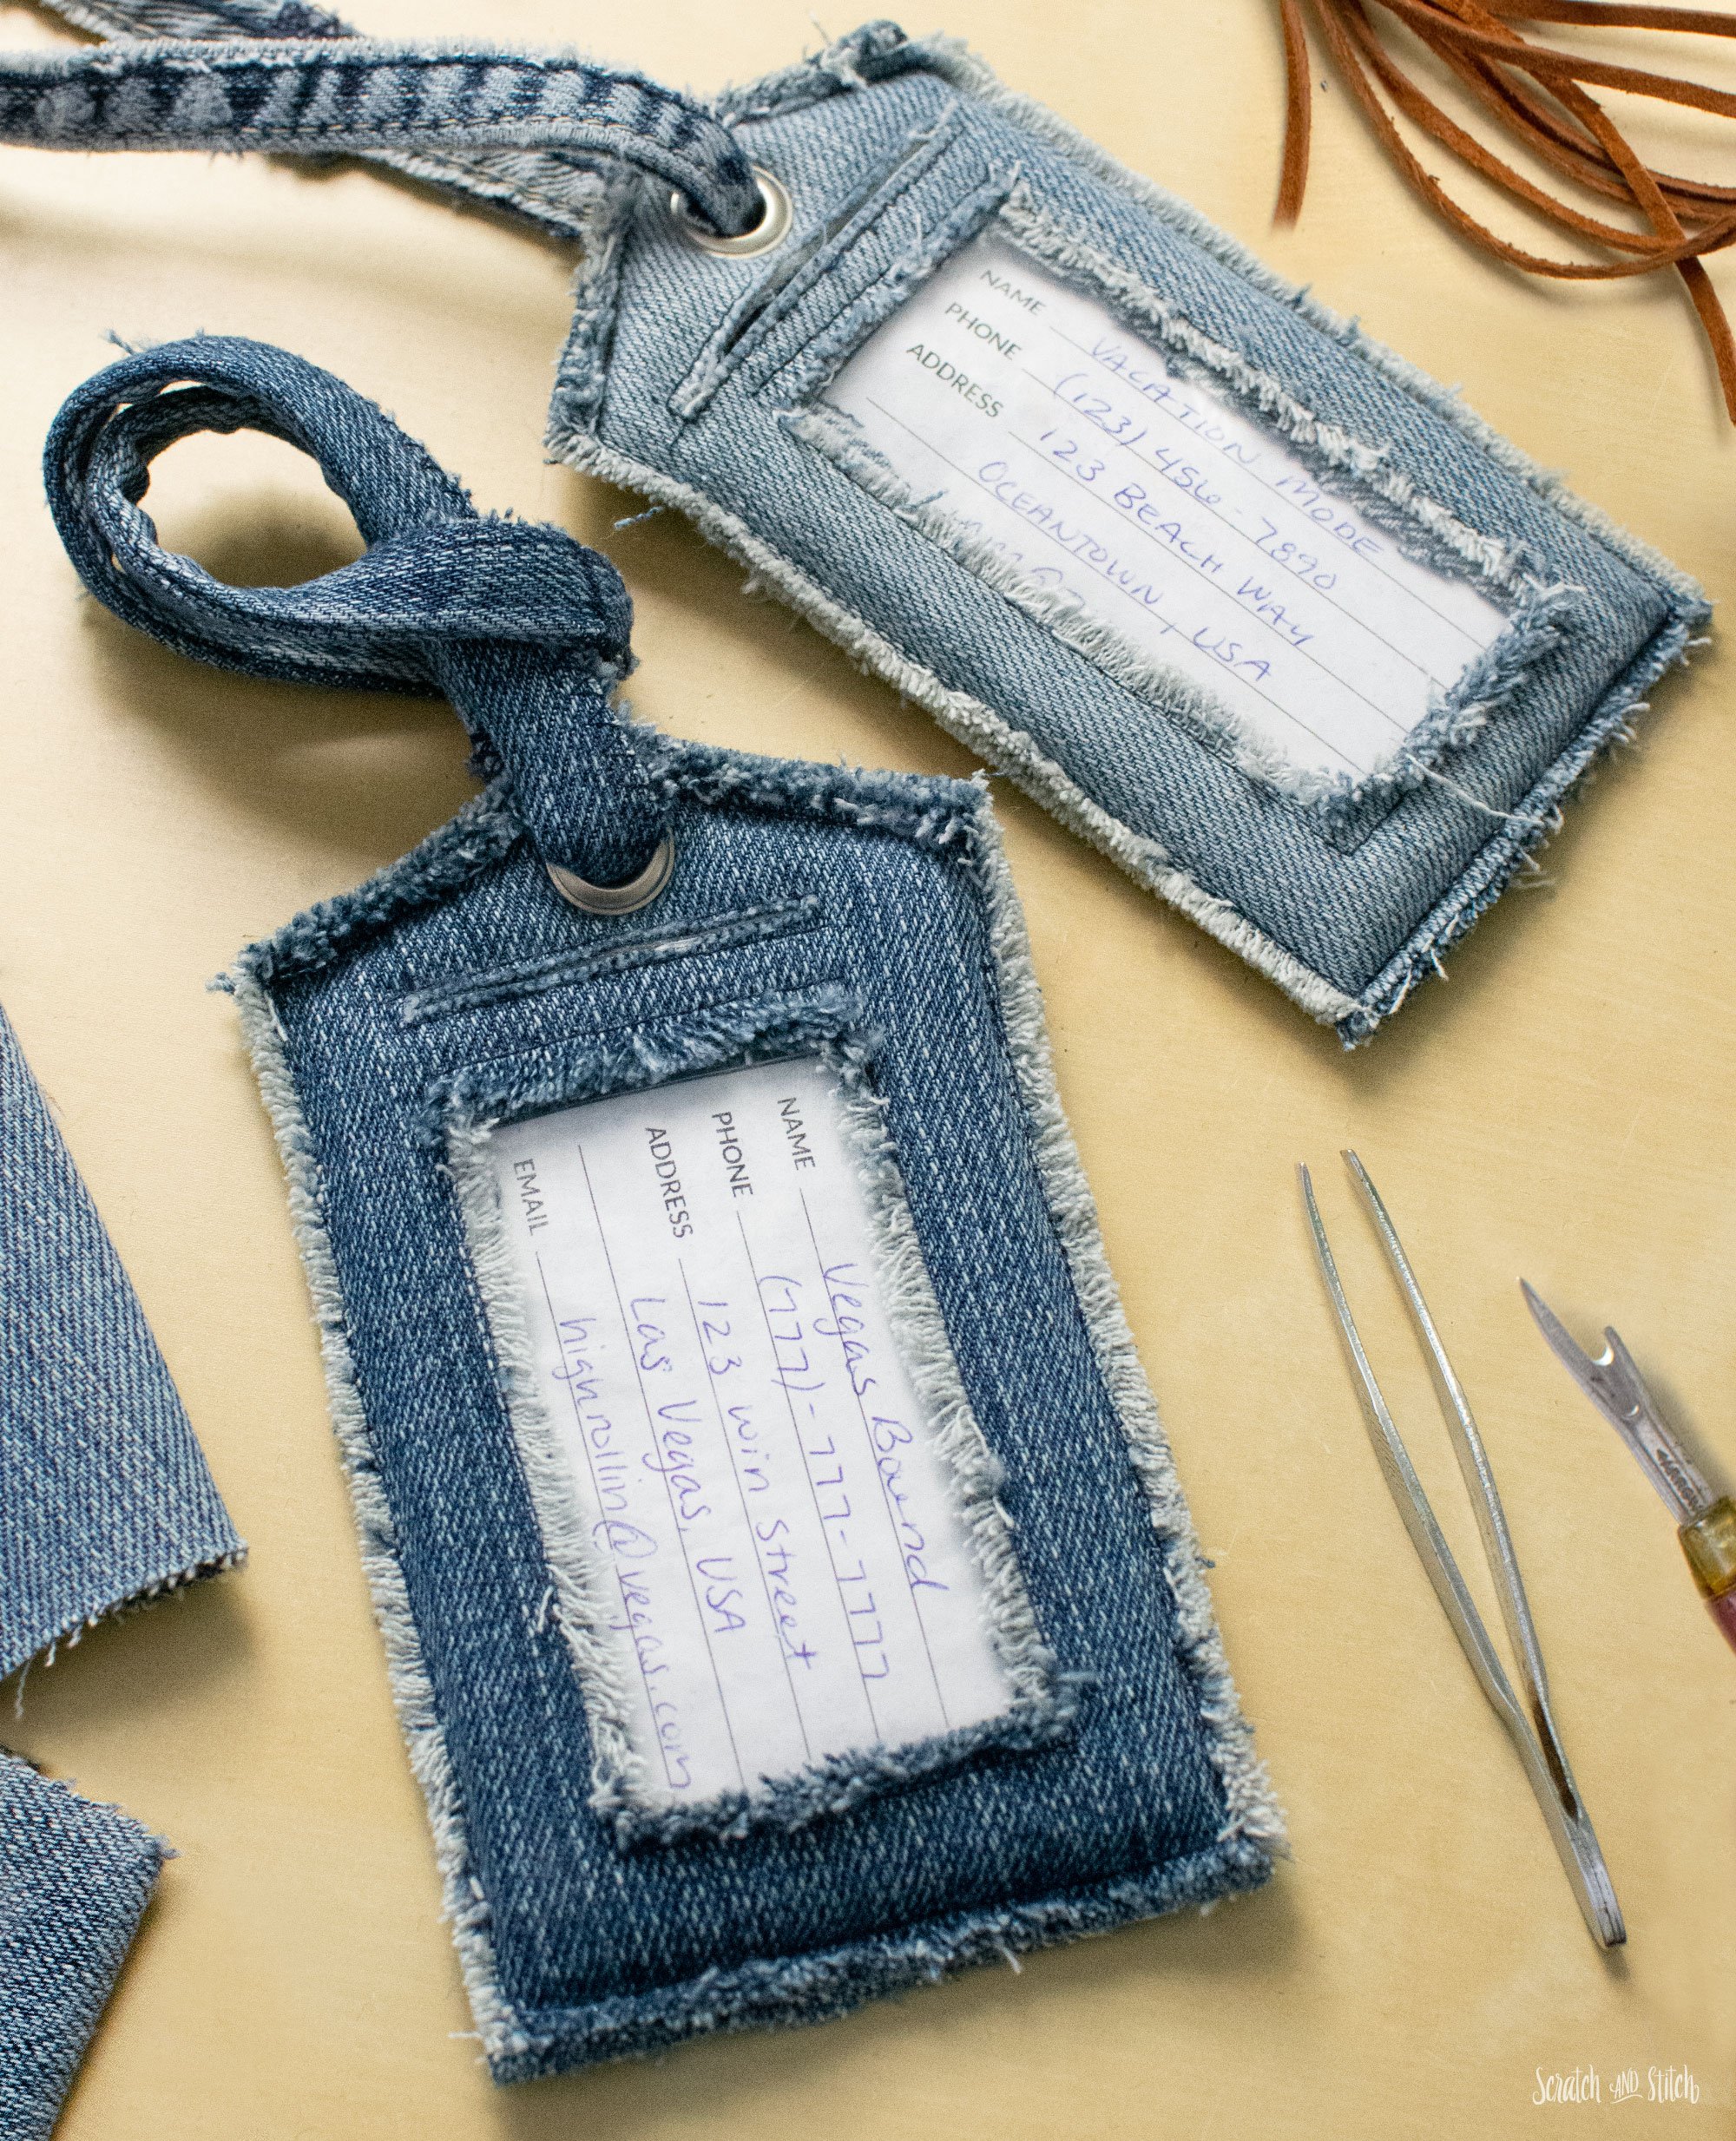 How to Make Luggage Tags 